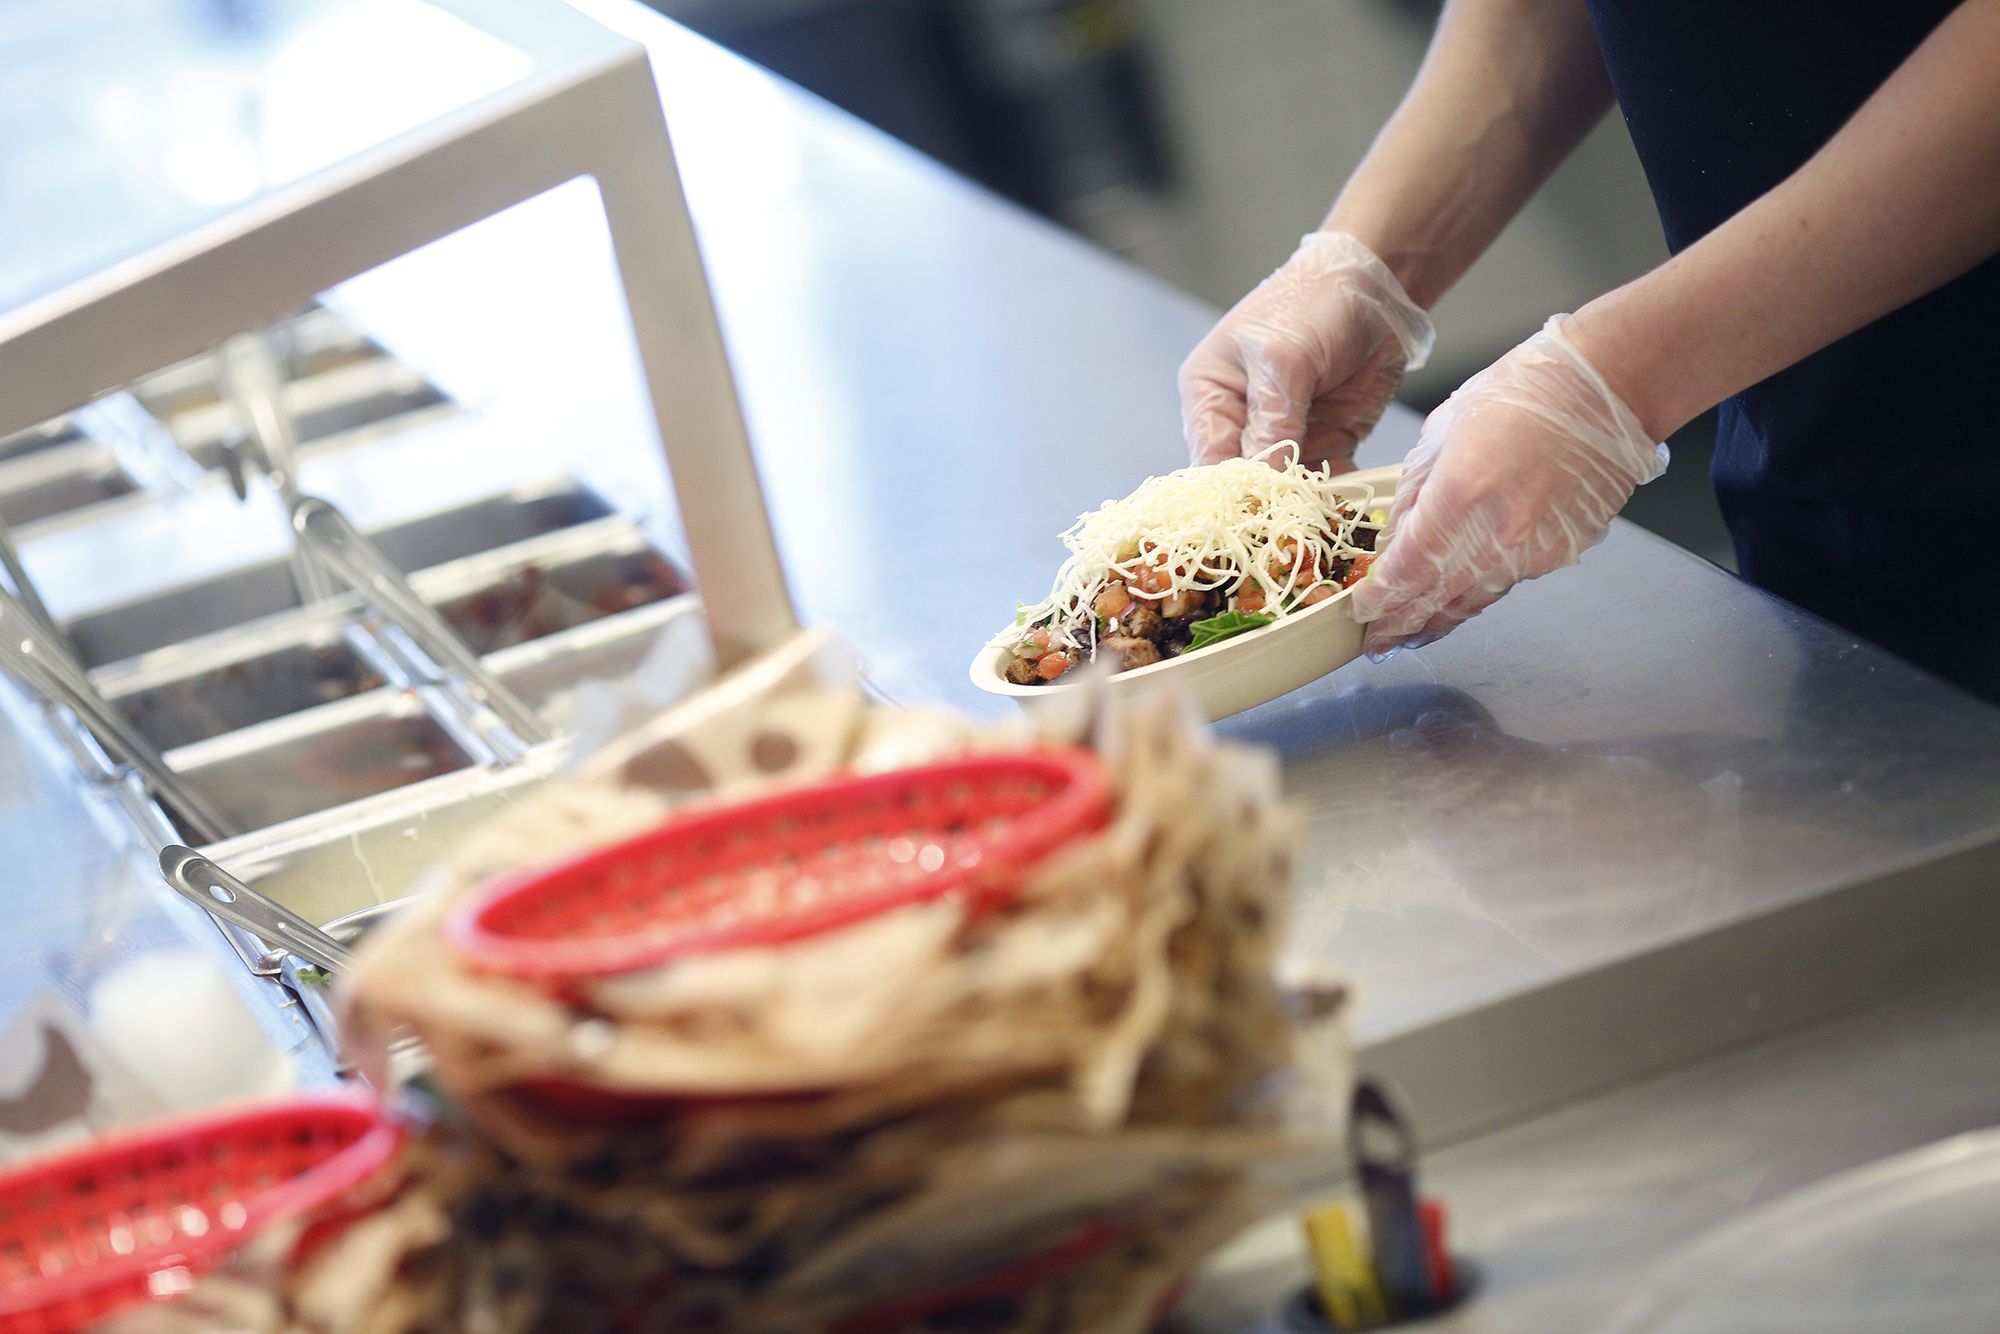 A customer who threw a burrito bowl in a Chipotle worker's face in September has been sentenced to ...